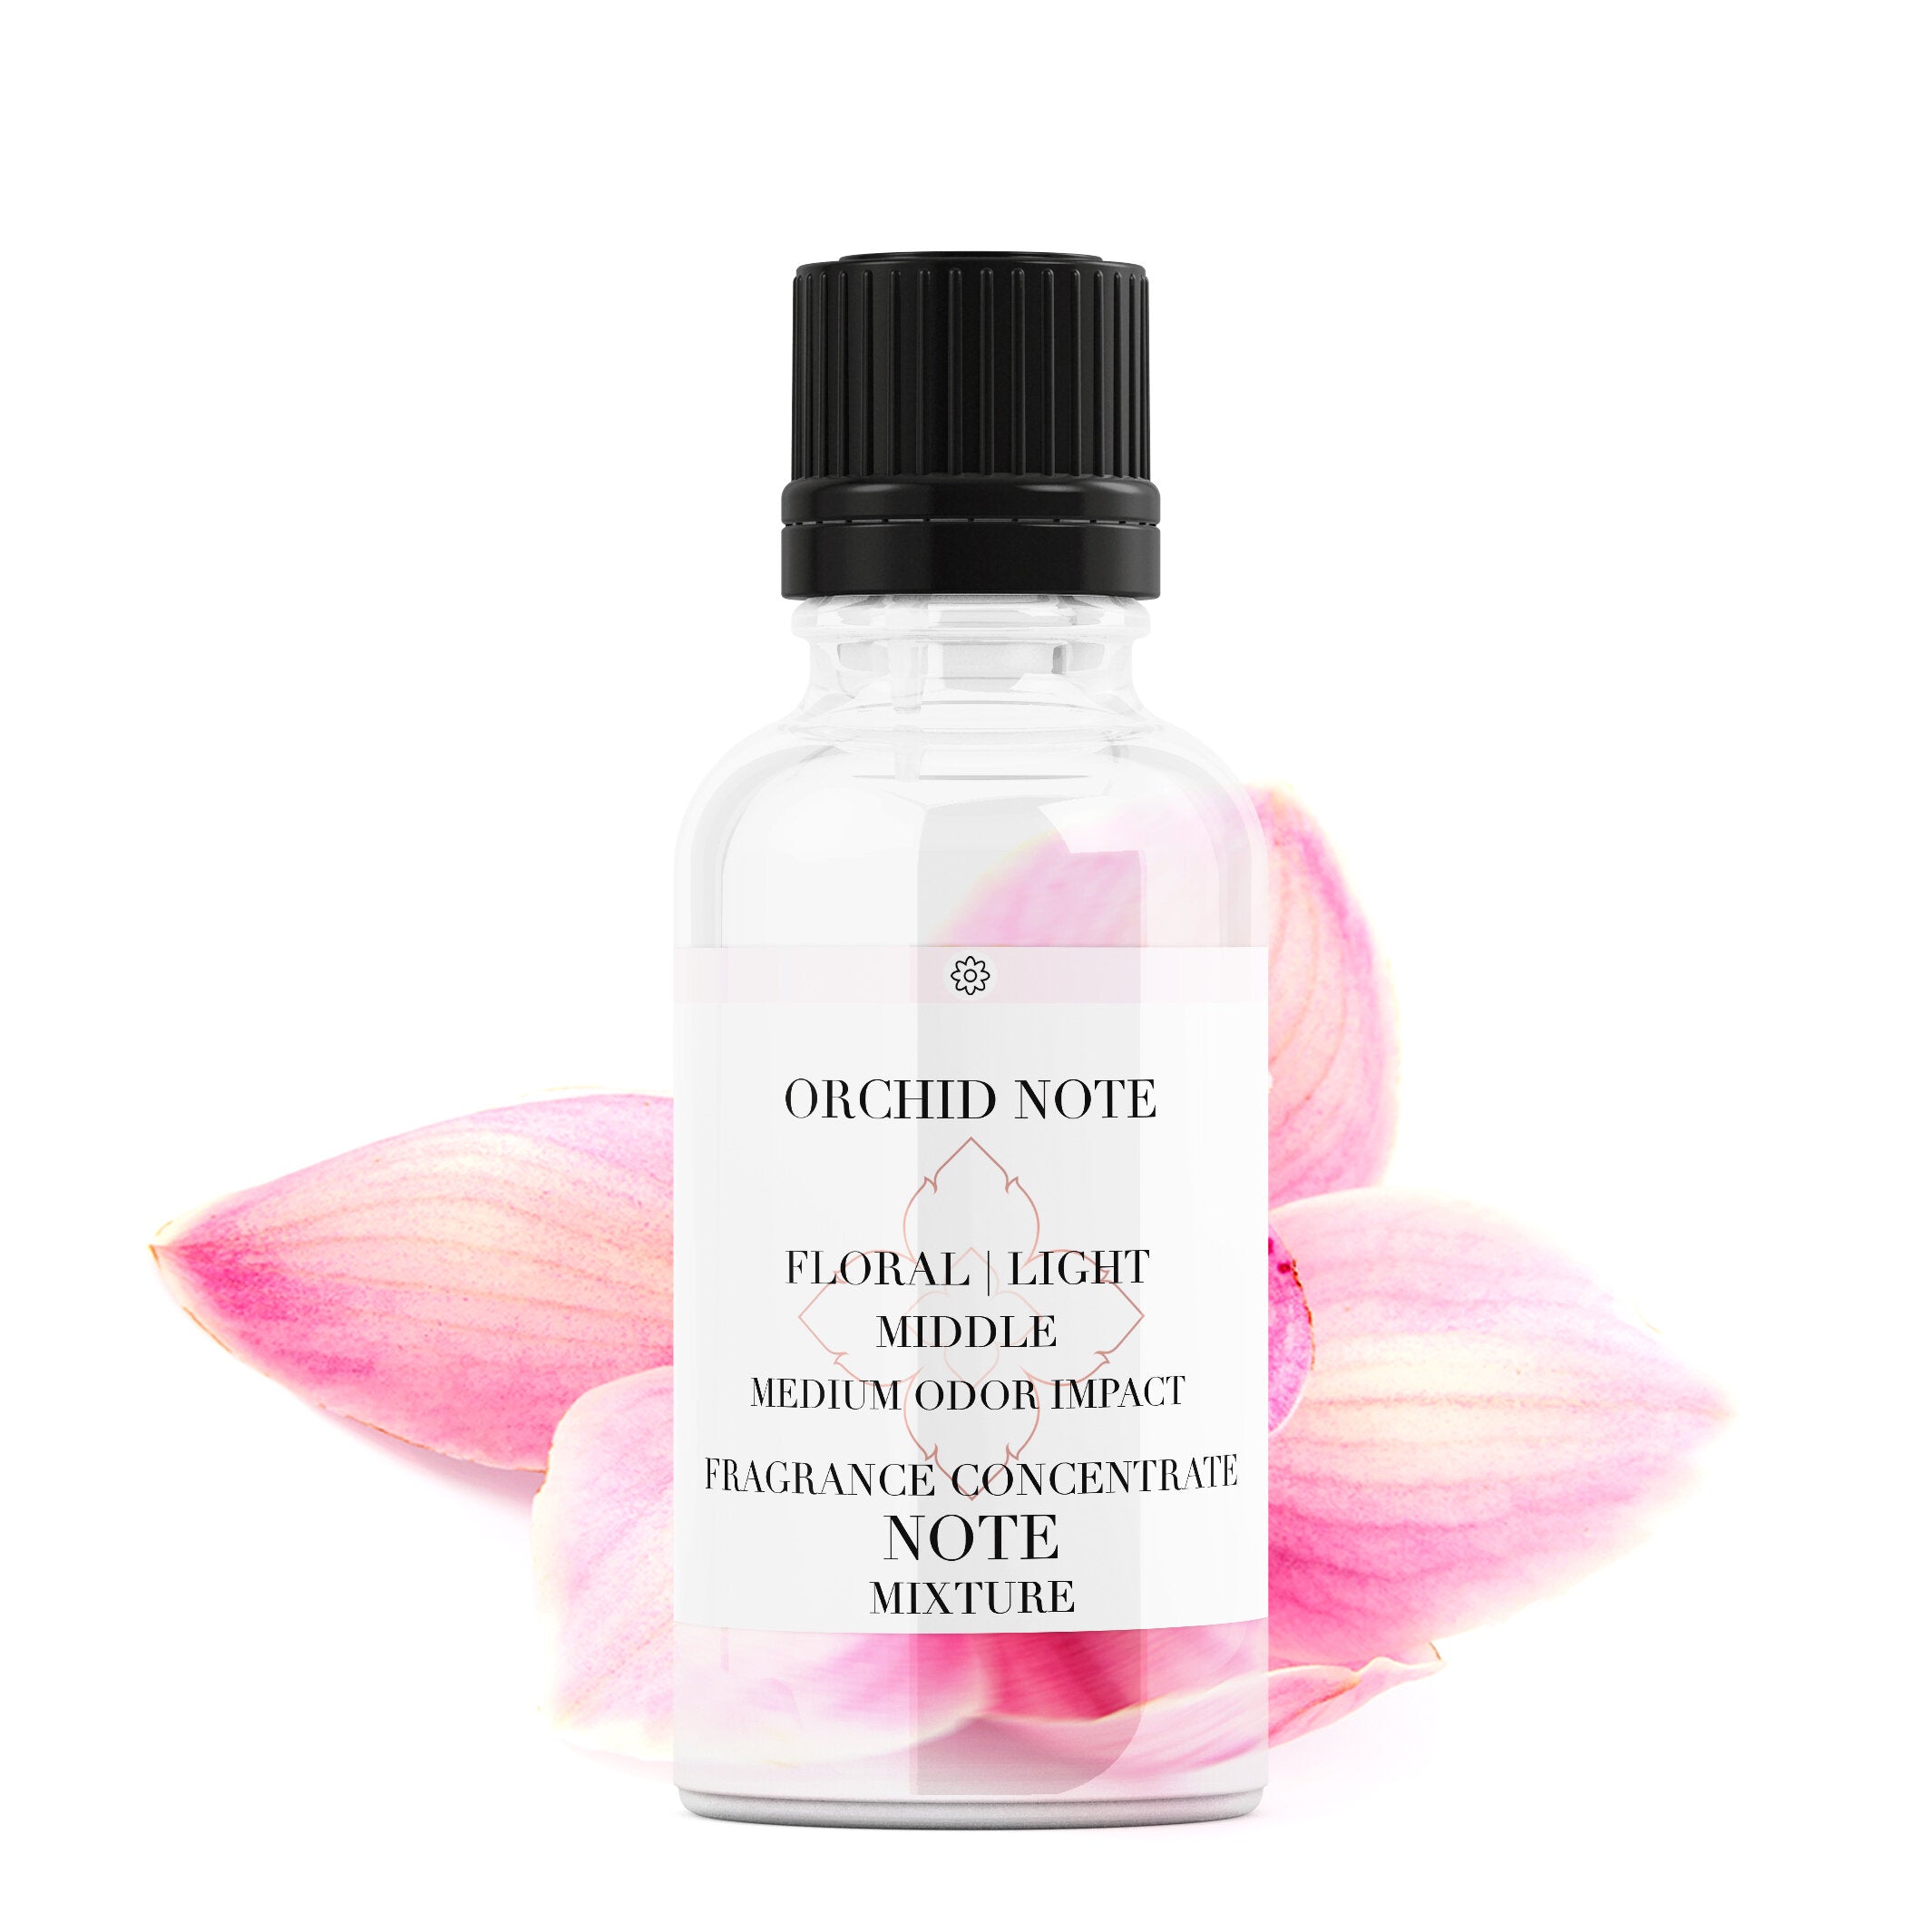 Orchid Perfume, Fine Fragrance